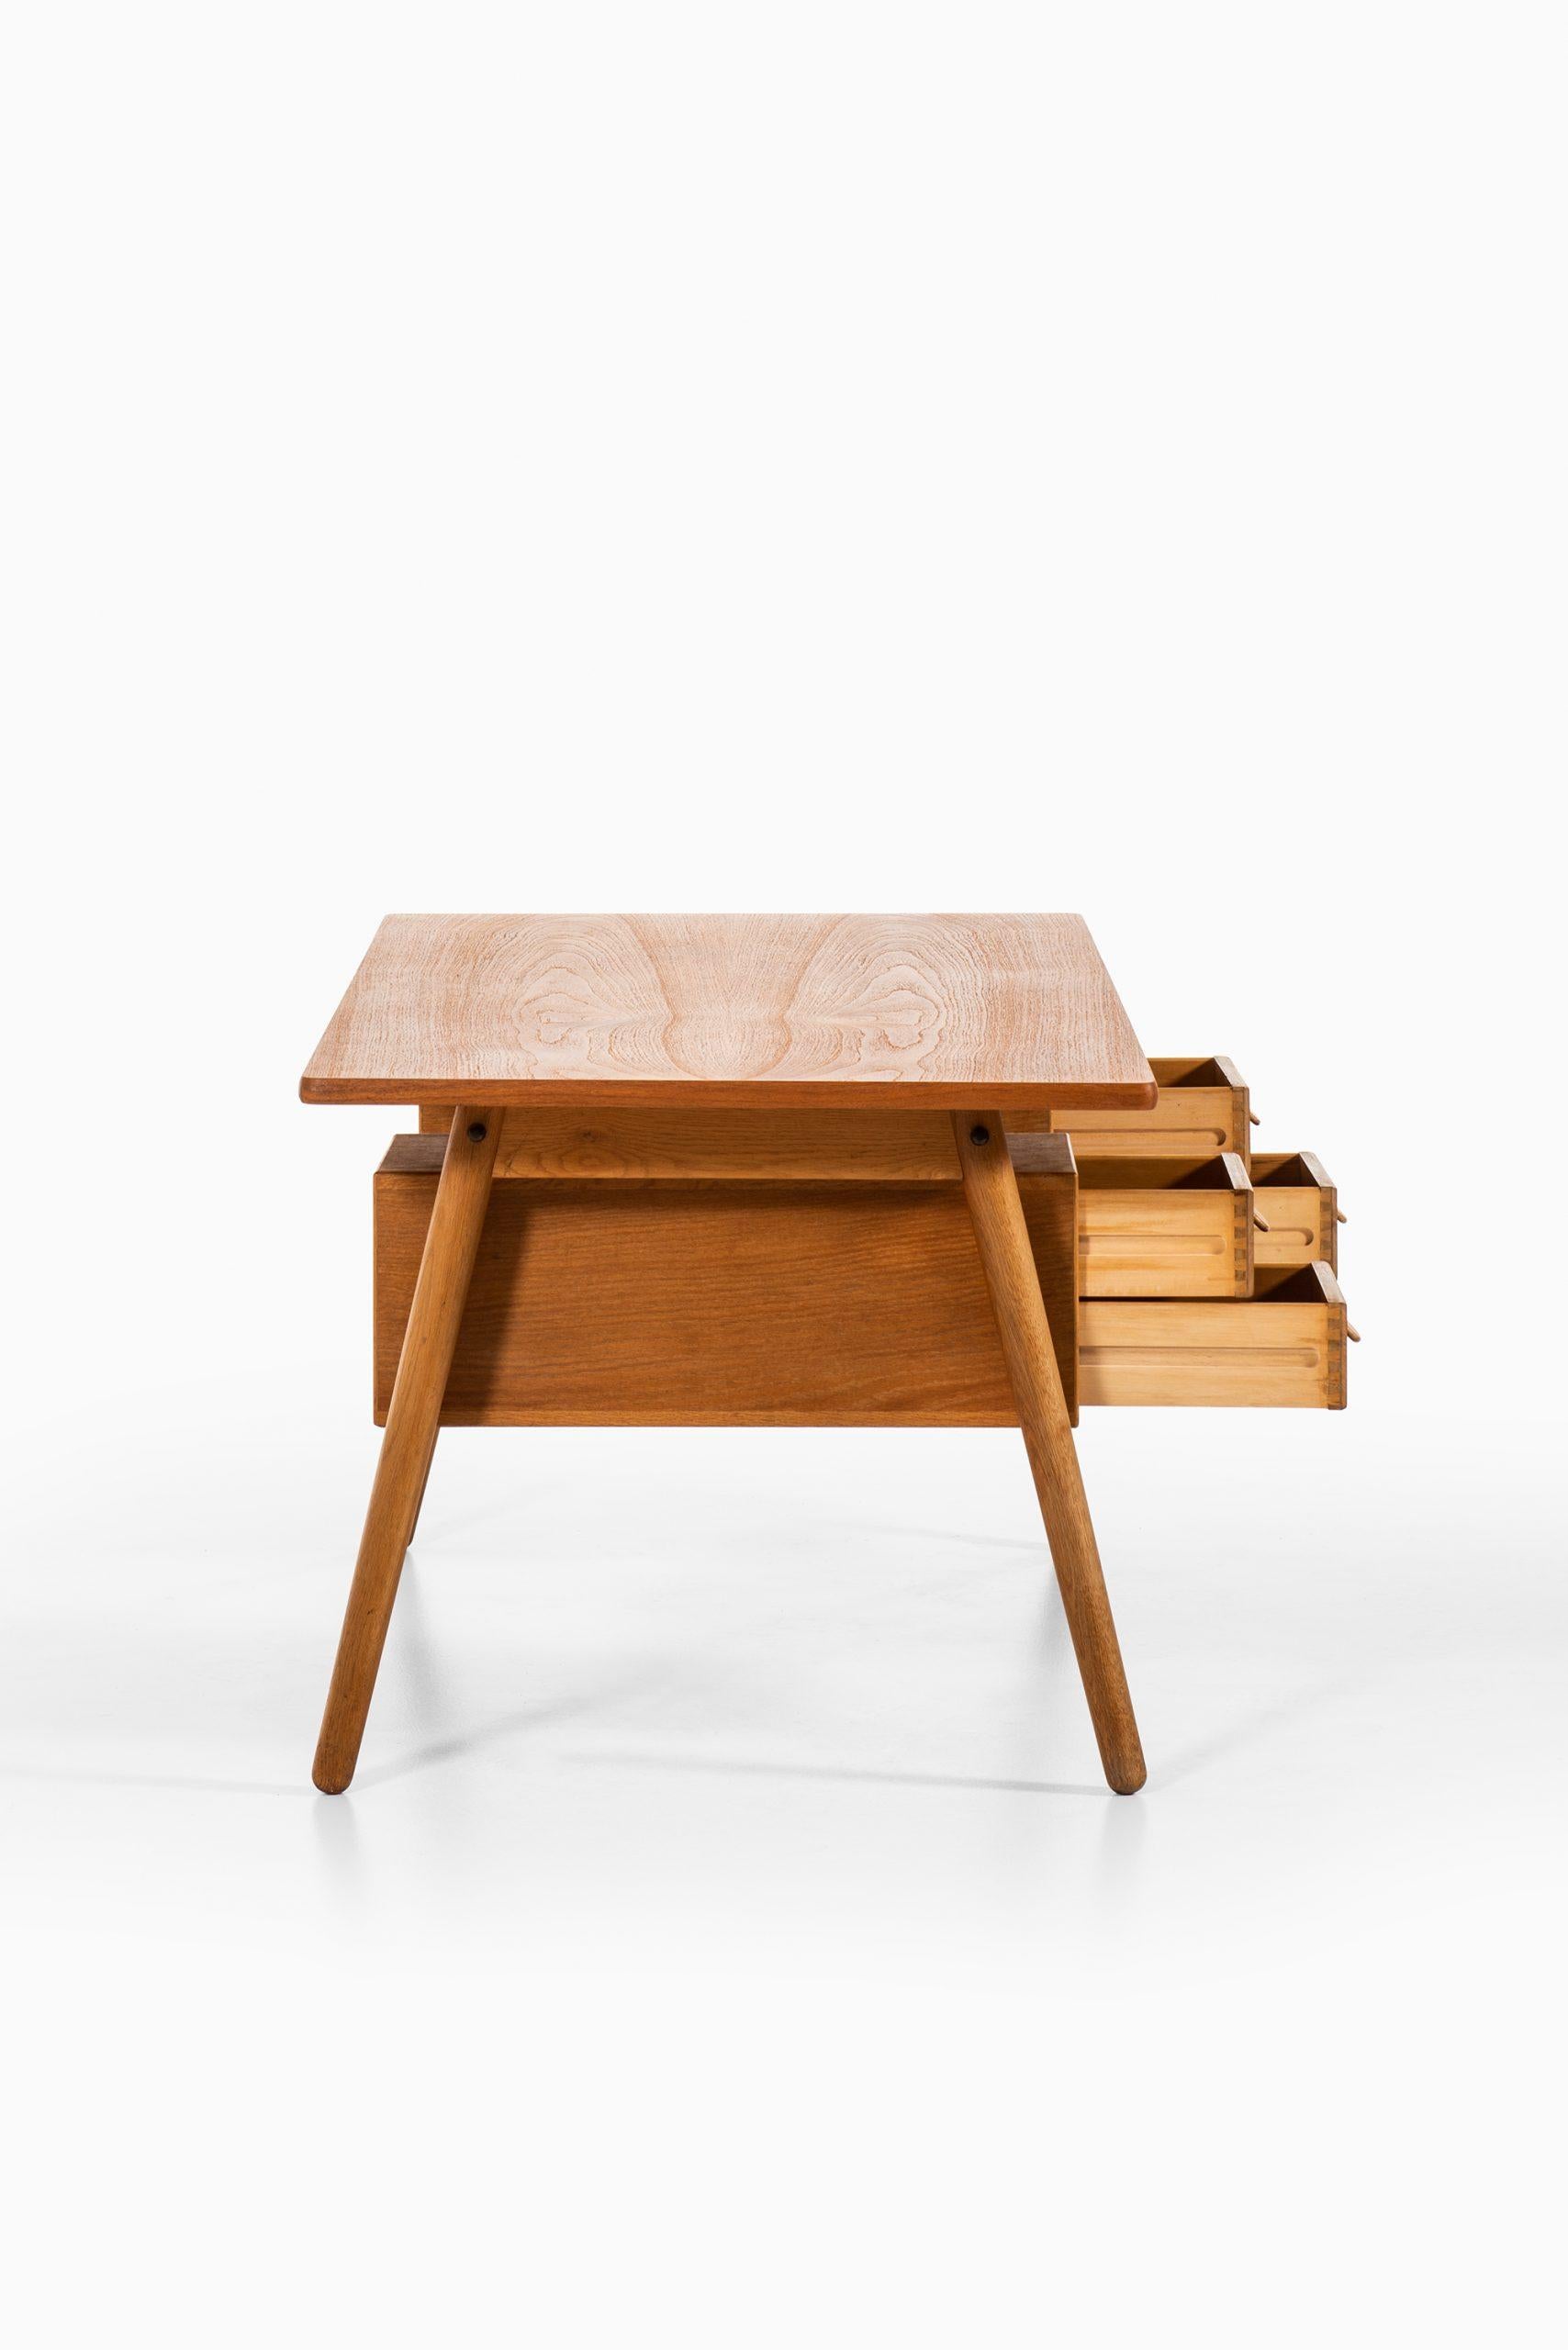 Poul Volther Desk Produced by FDB Møbler in Denmark For Sale 1